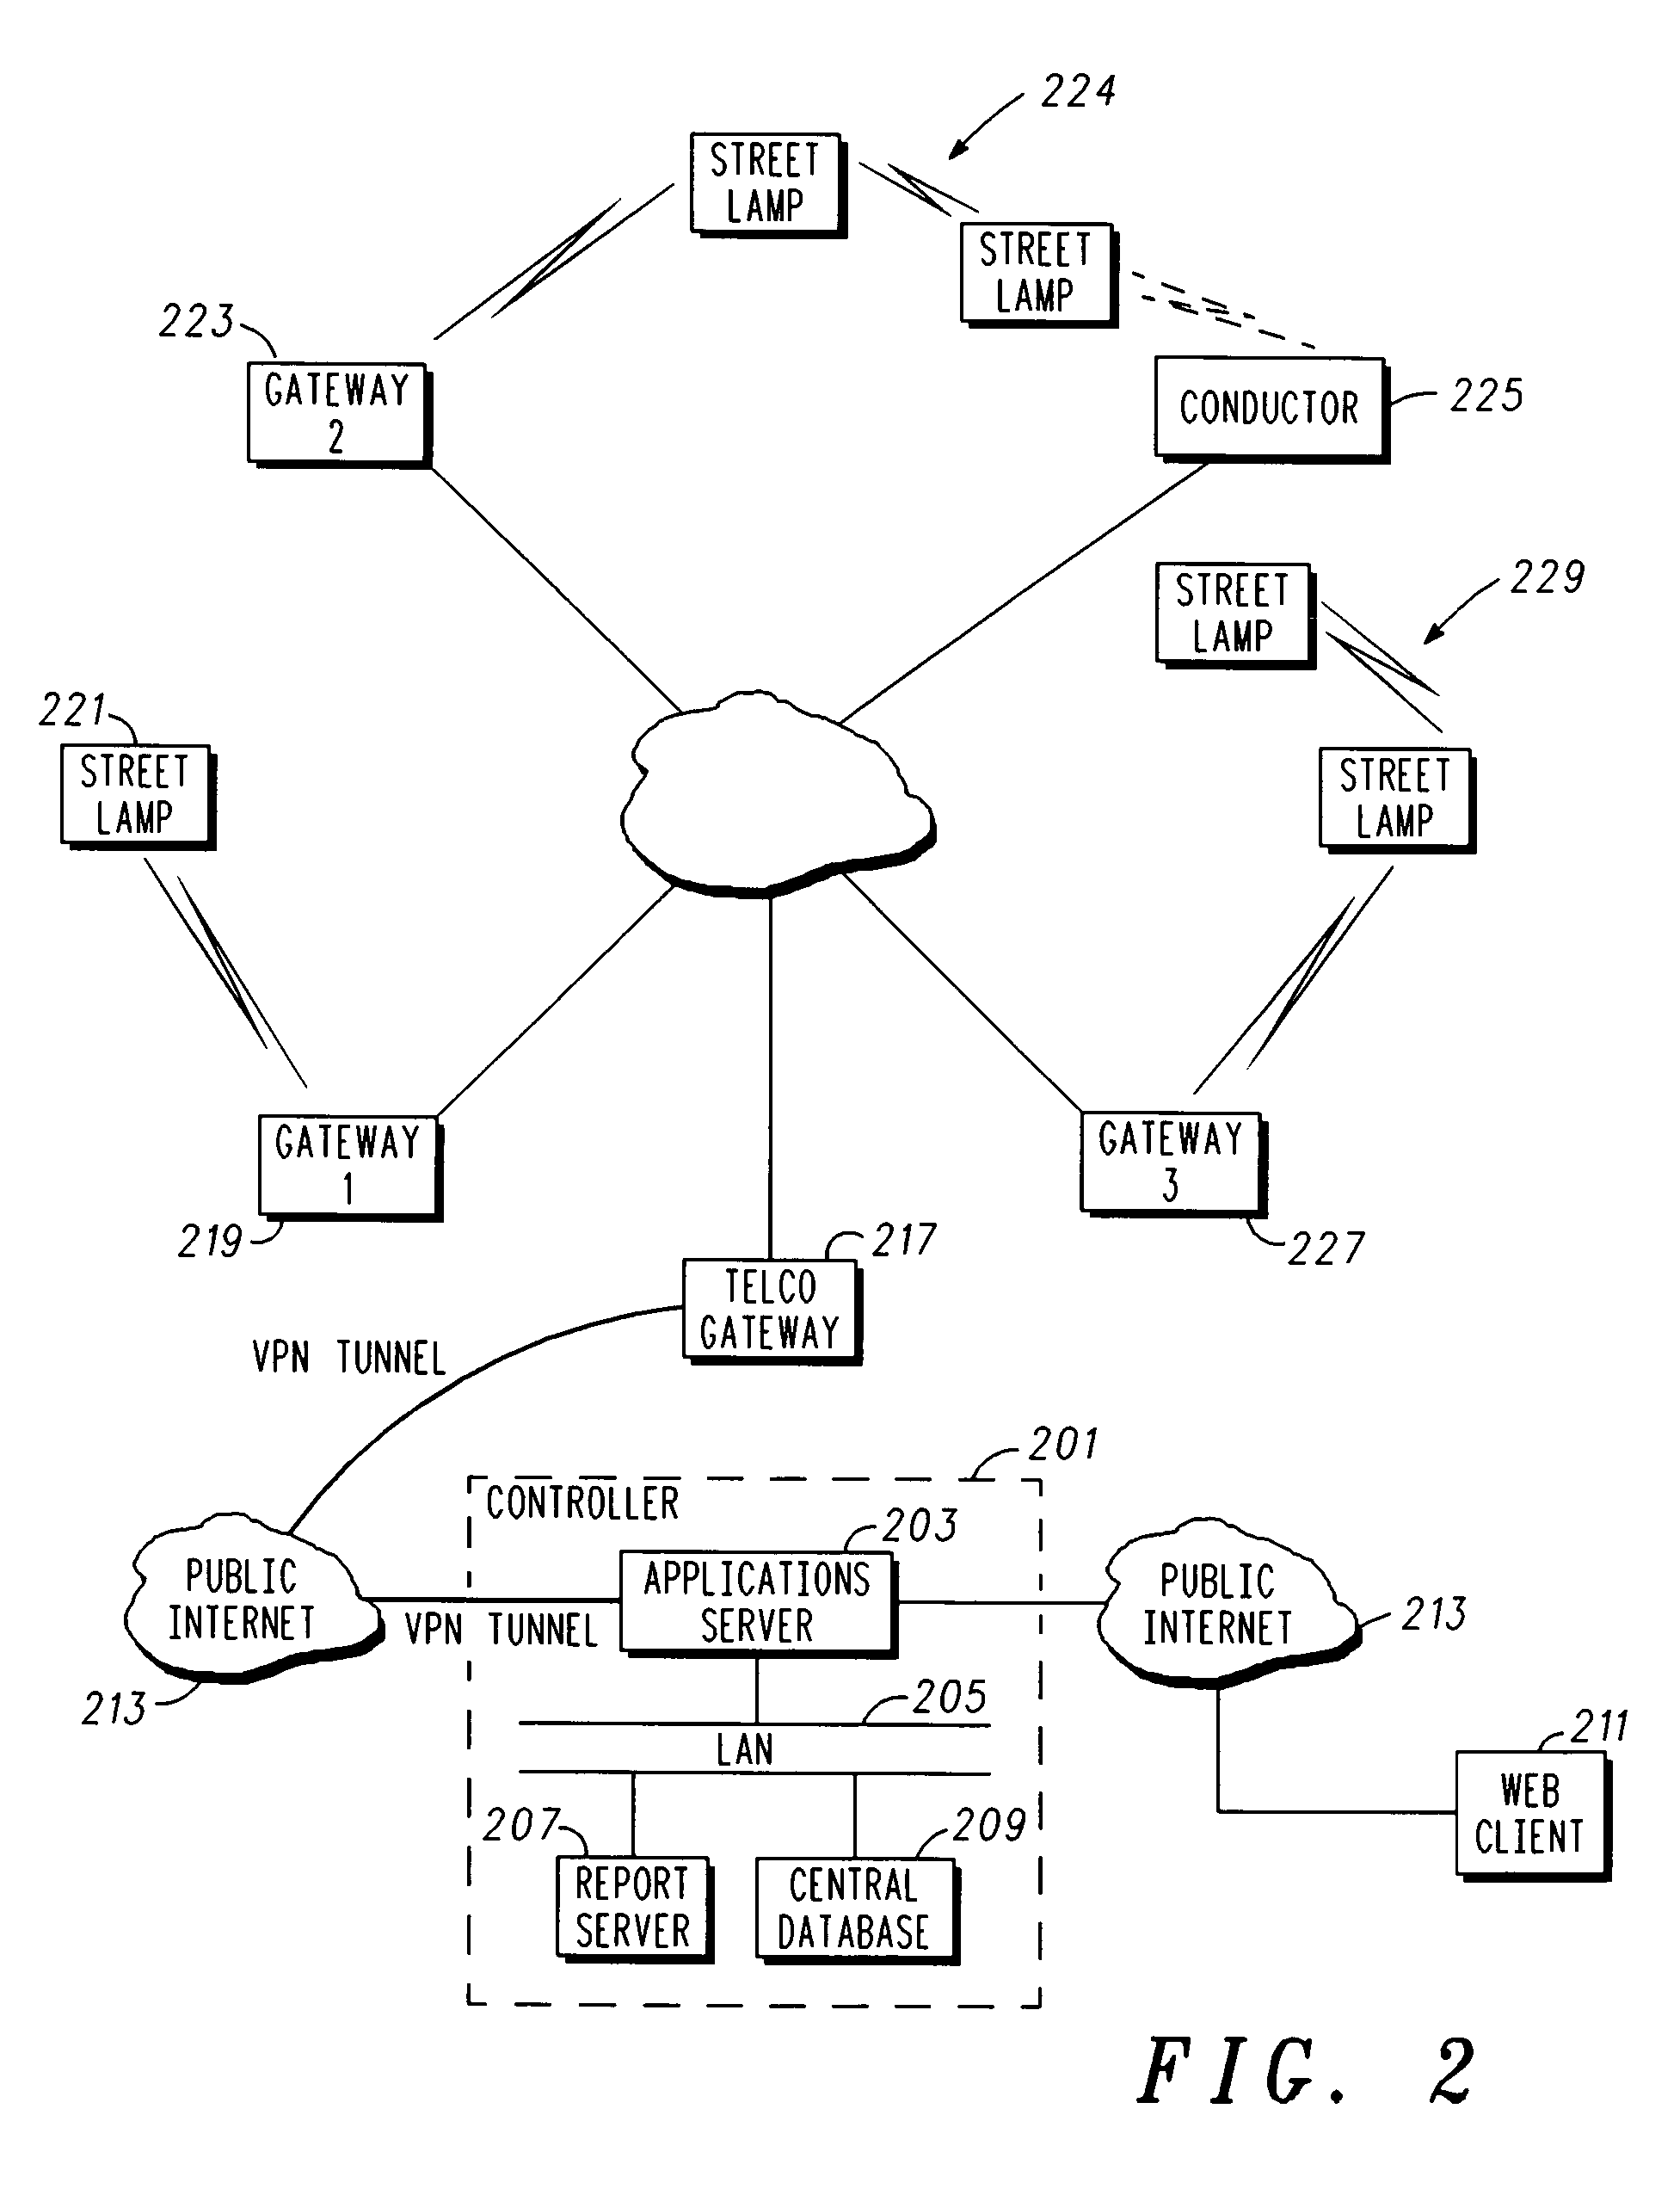 Adaptive energy performance monitoring and control system